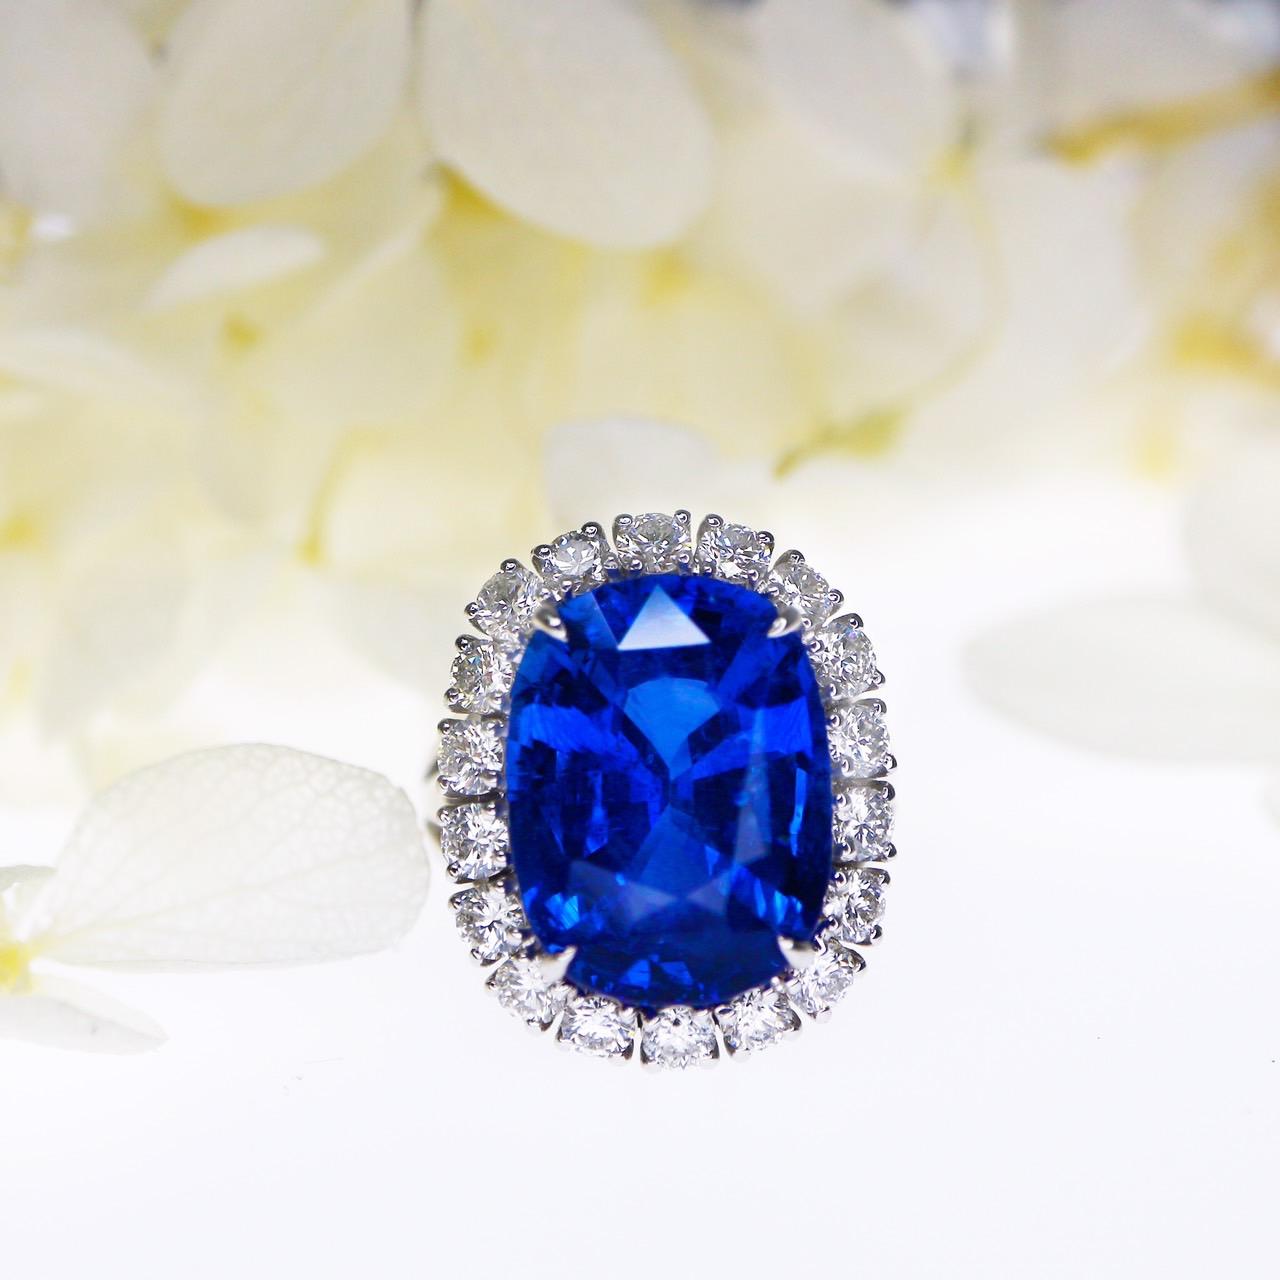 *GIA 18K 10.26 ct Royal Blue Sapphire&Diamonds Antique Art Deco Engagement Ring*
GIA-Certified natural royal blue sapphire as the center stone weighing 10.26 ct set on the 18K white gold halo design band with natural FG VS diamonds weighing 1.47 ct.